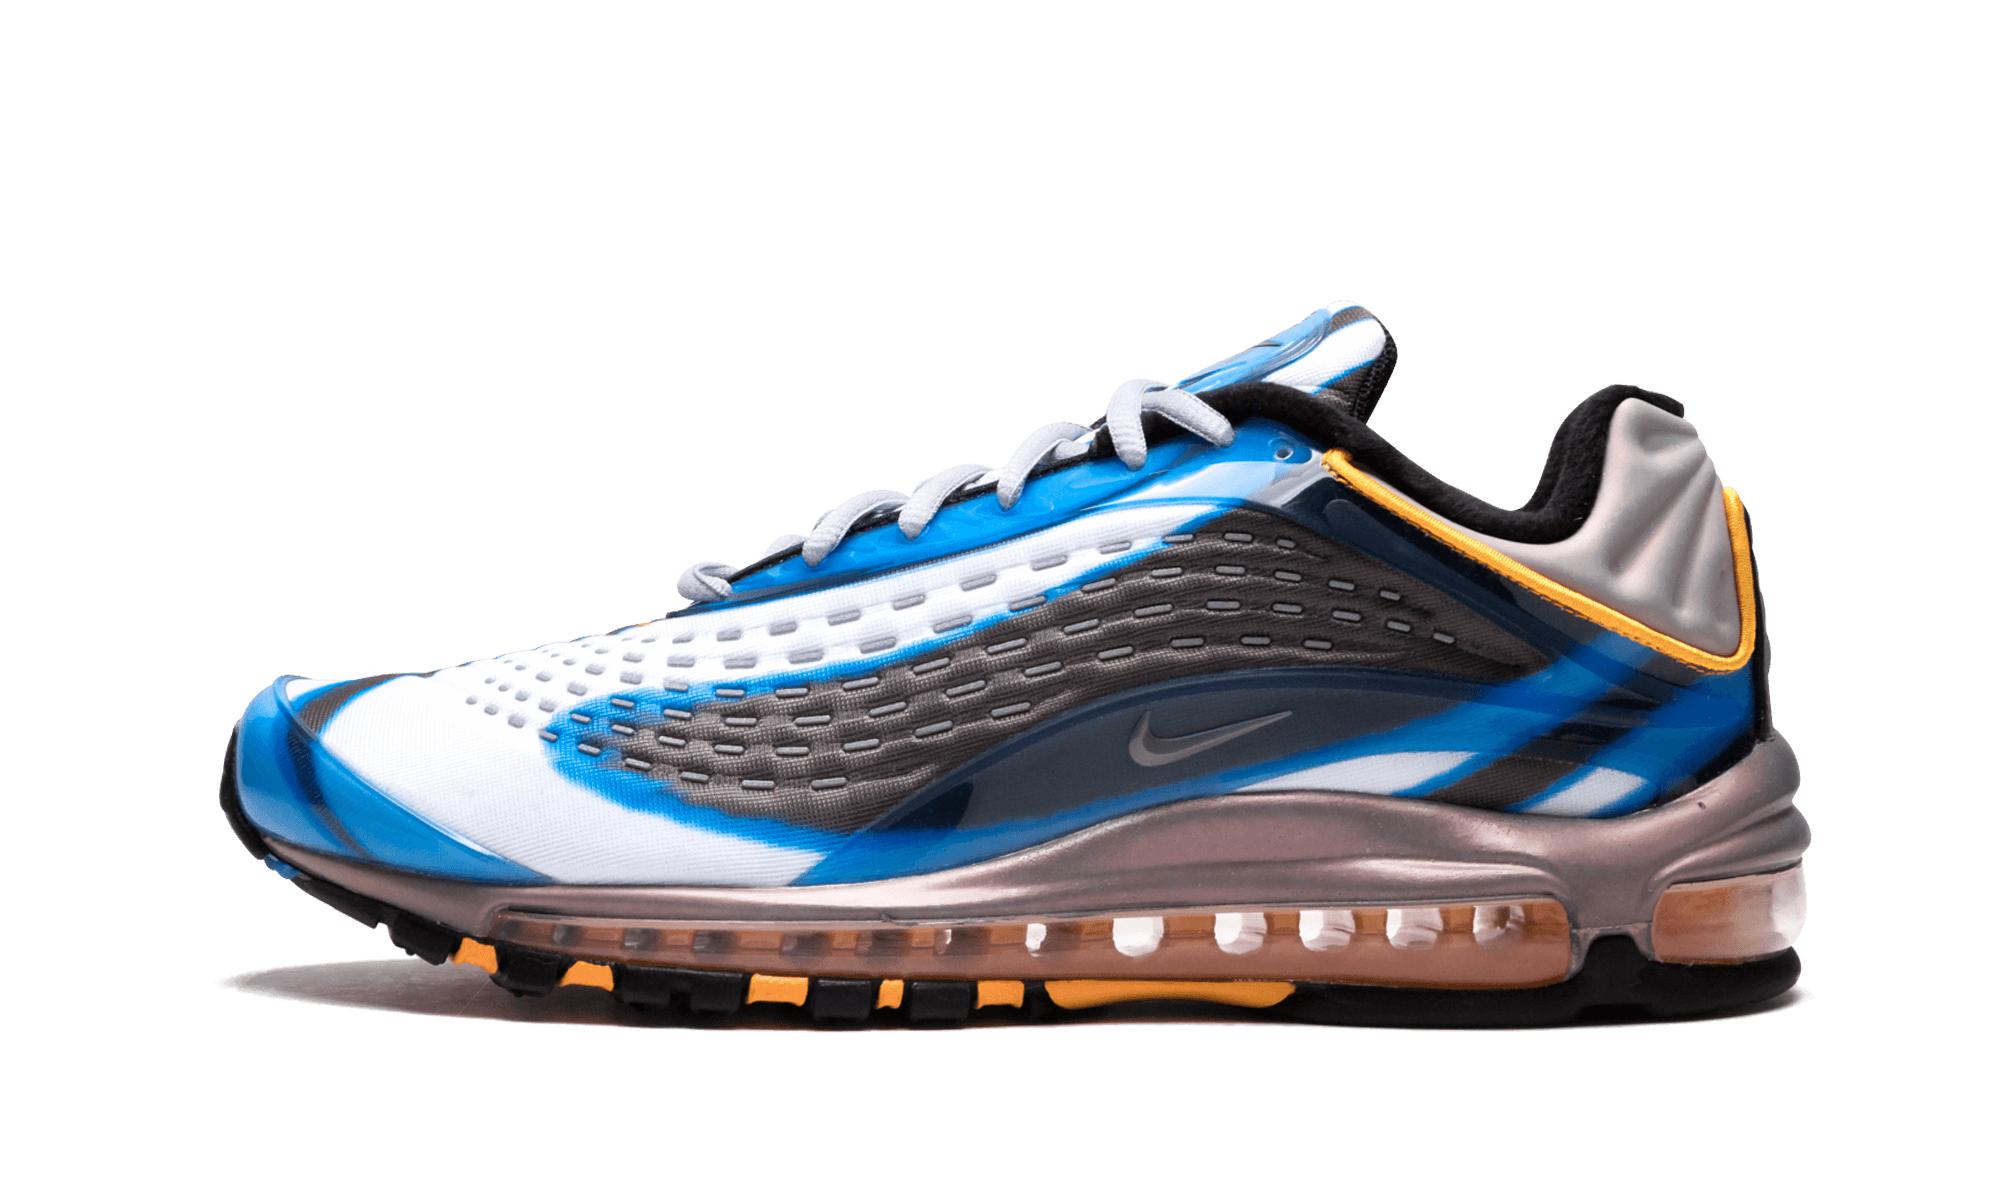 nike air max deluxe womens